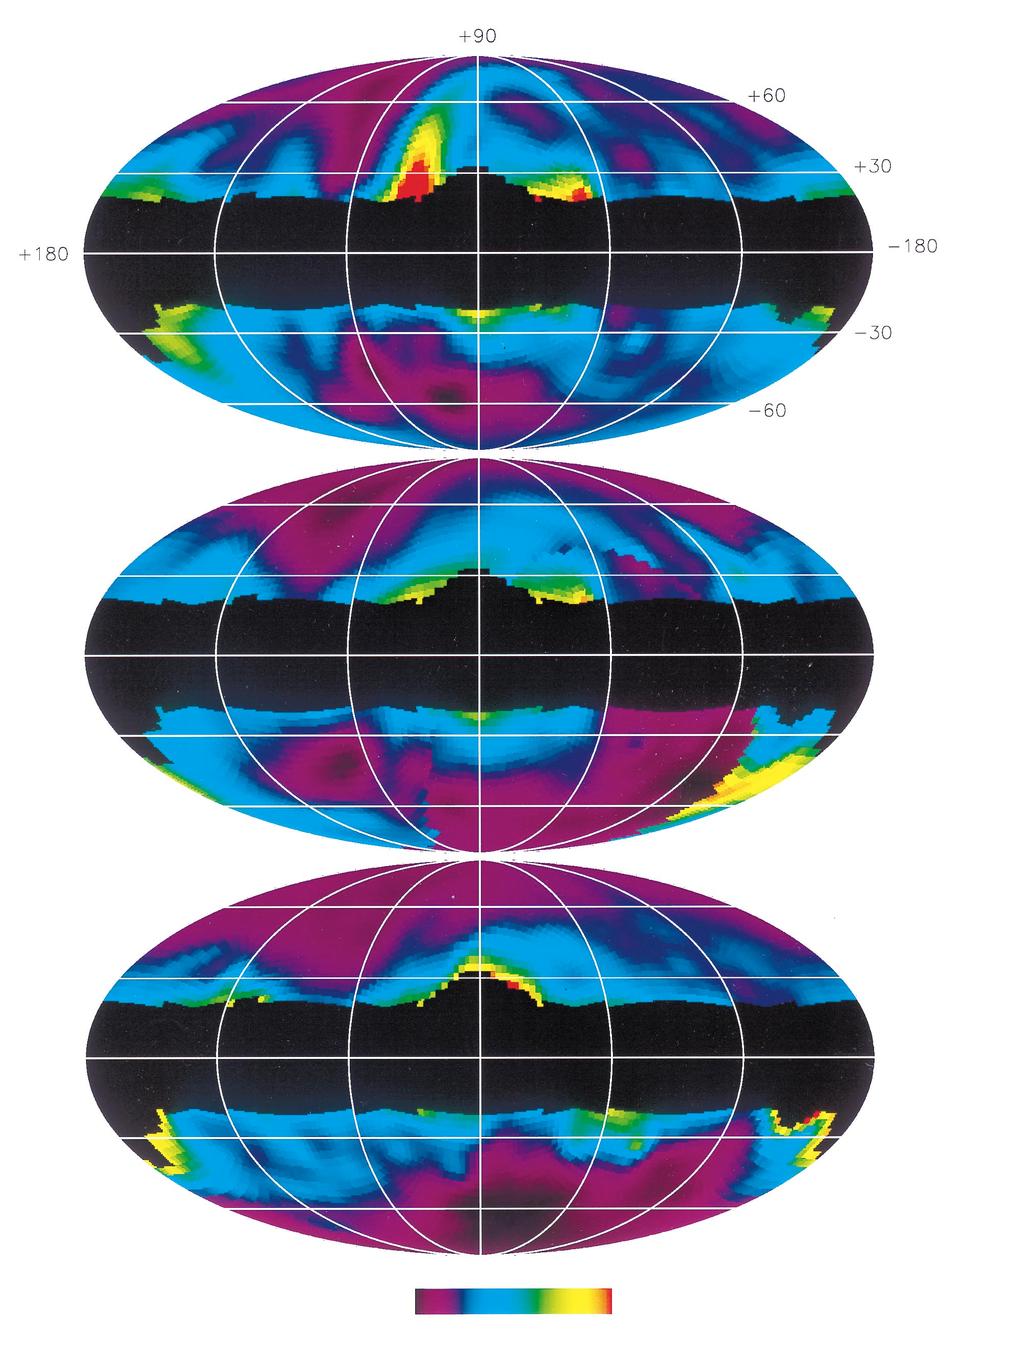 PLATE L4 FIG. 1. Galactic templates used in cross-correlation technique; Mollweide projection in Galactic coordinates. Top: Synchrotron-dominated 408 MHz survey. Middle: Cosmic-ray synchrotron model.